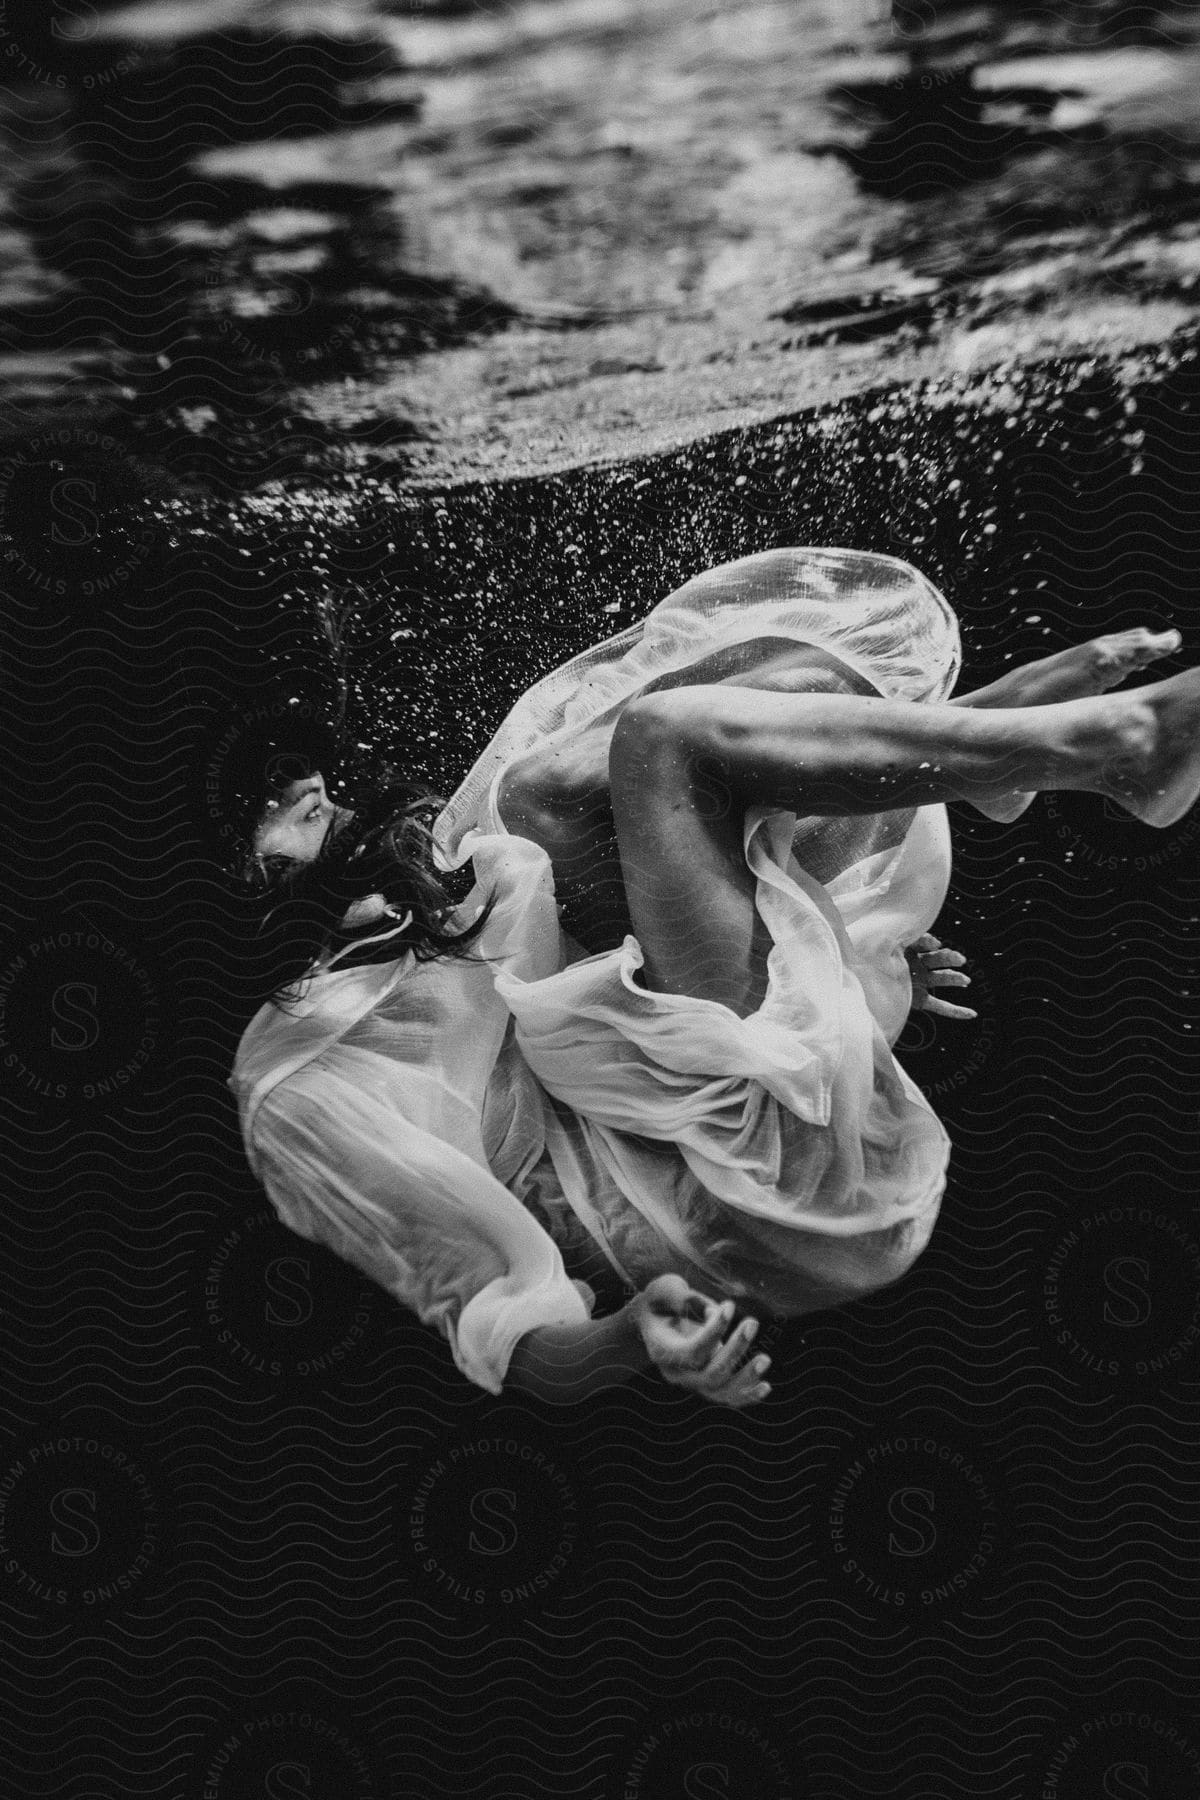 A woman floating underwater near the surface her dress exposing her legs